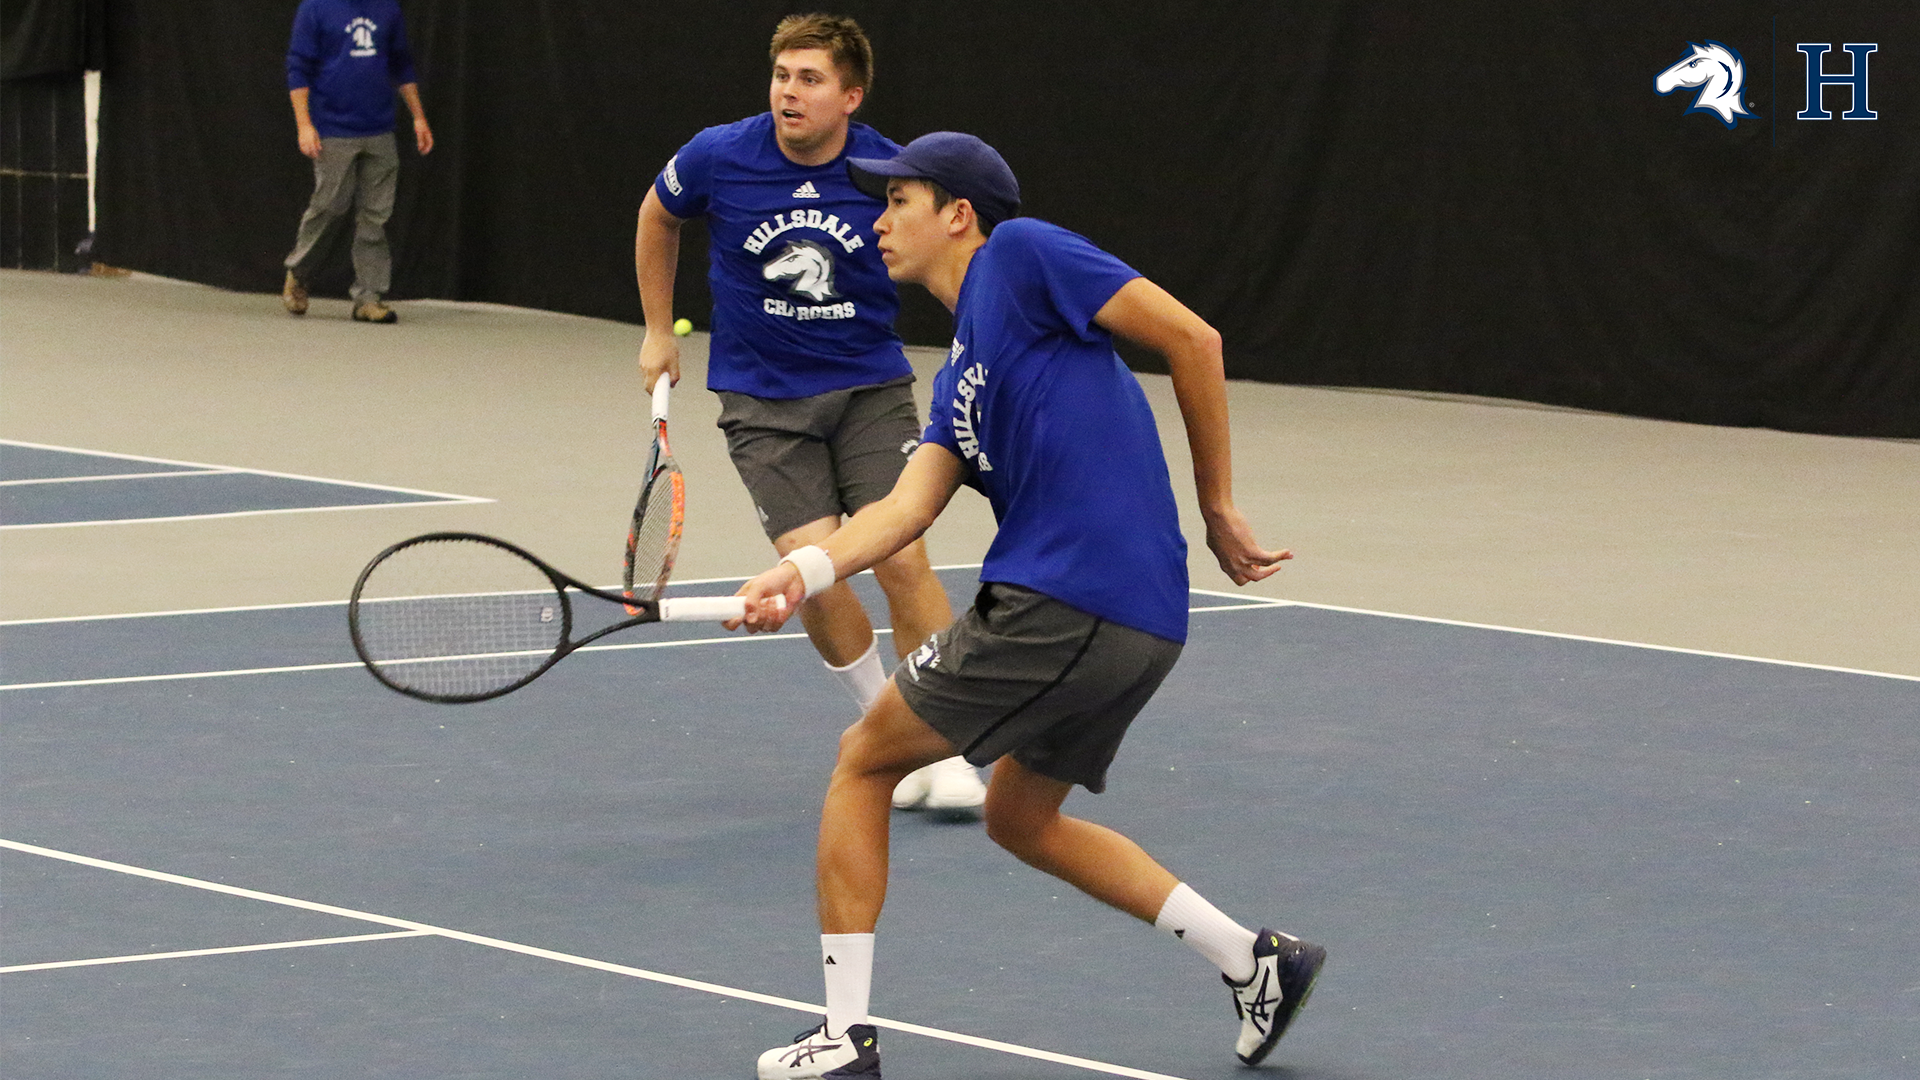 Chargers take down Cedarville, 5-2, in final home match of season